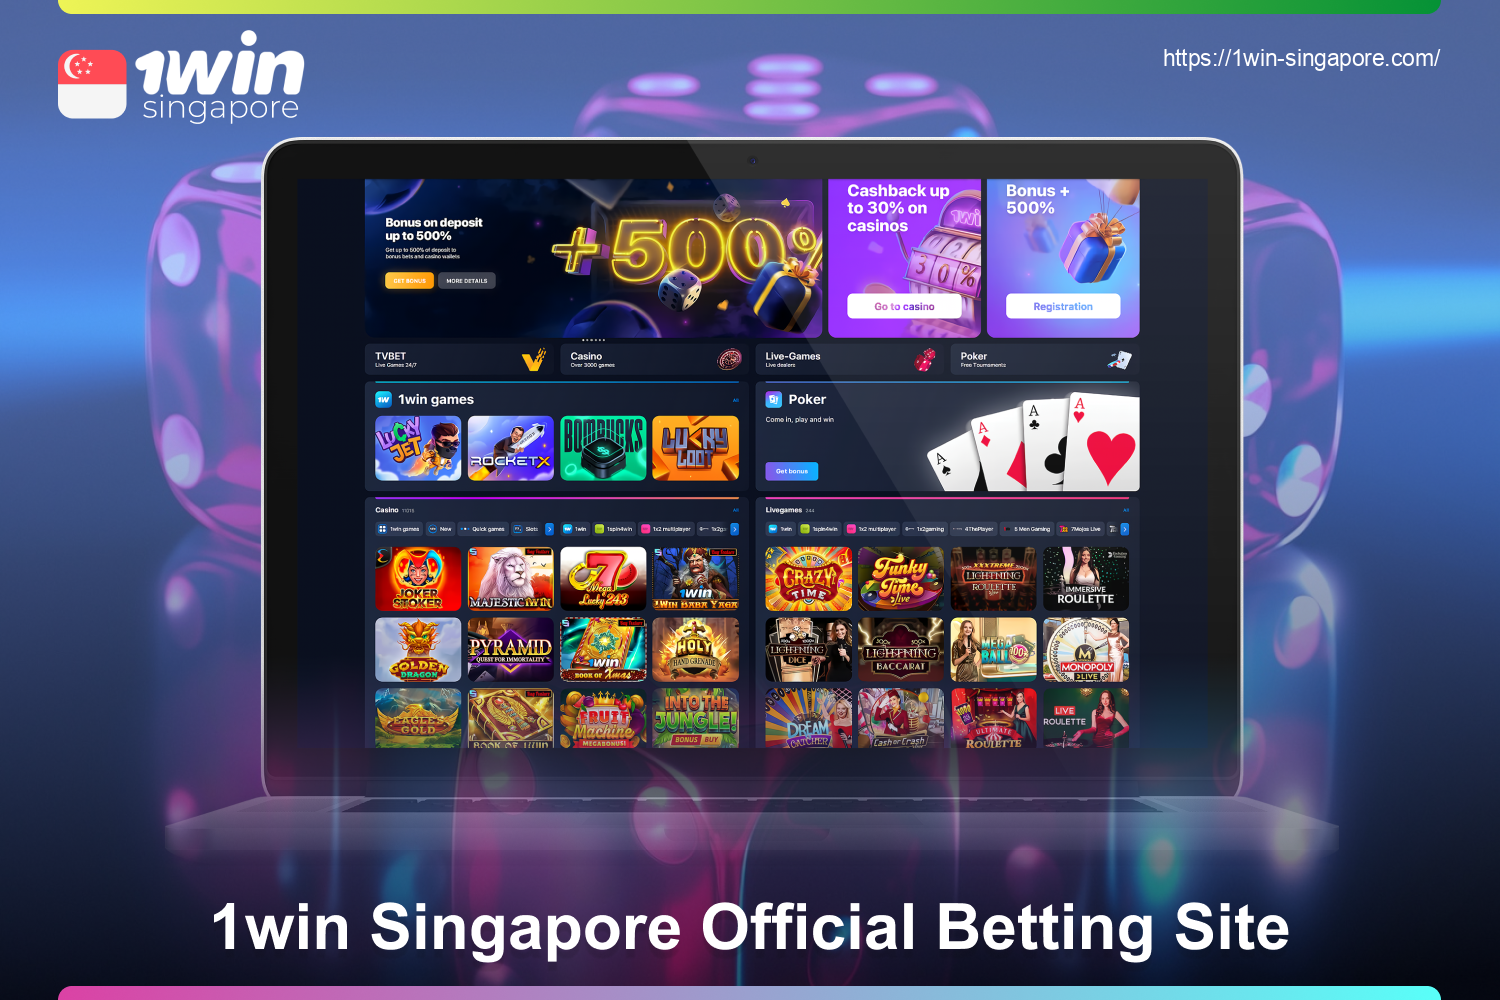 Every user from Singapore can start betting and playing casino games for real money at 1win